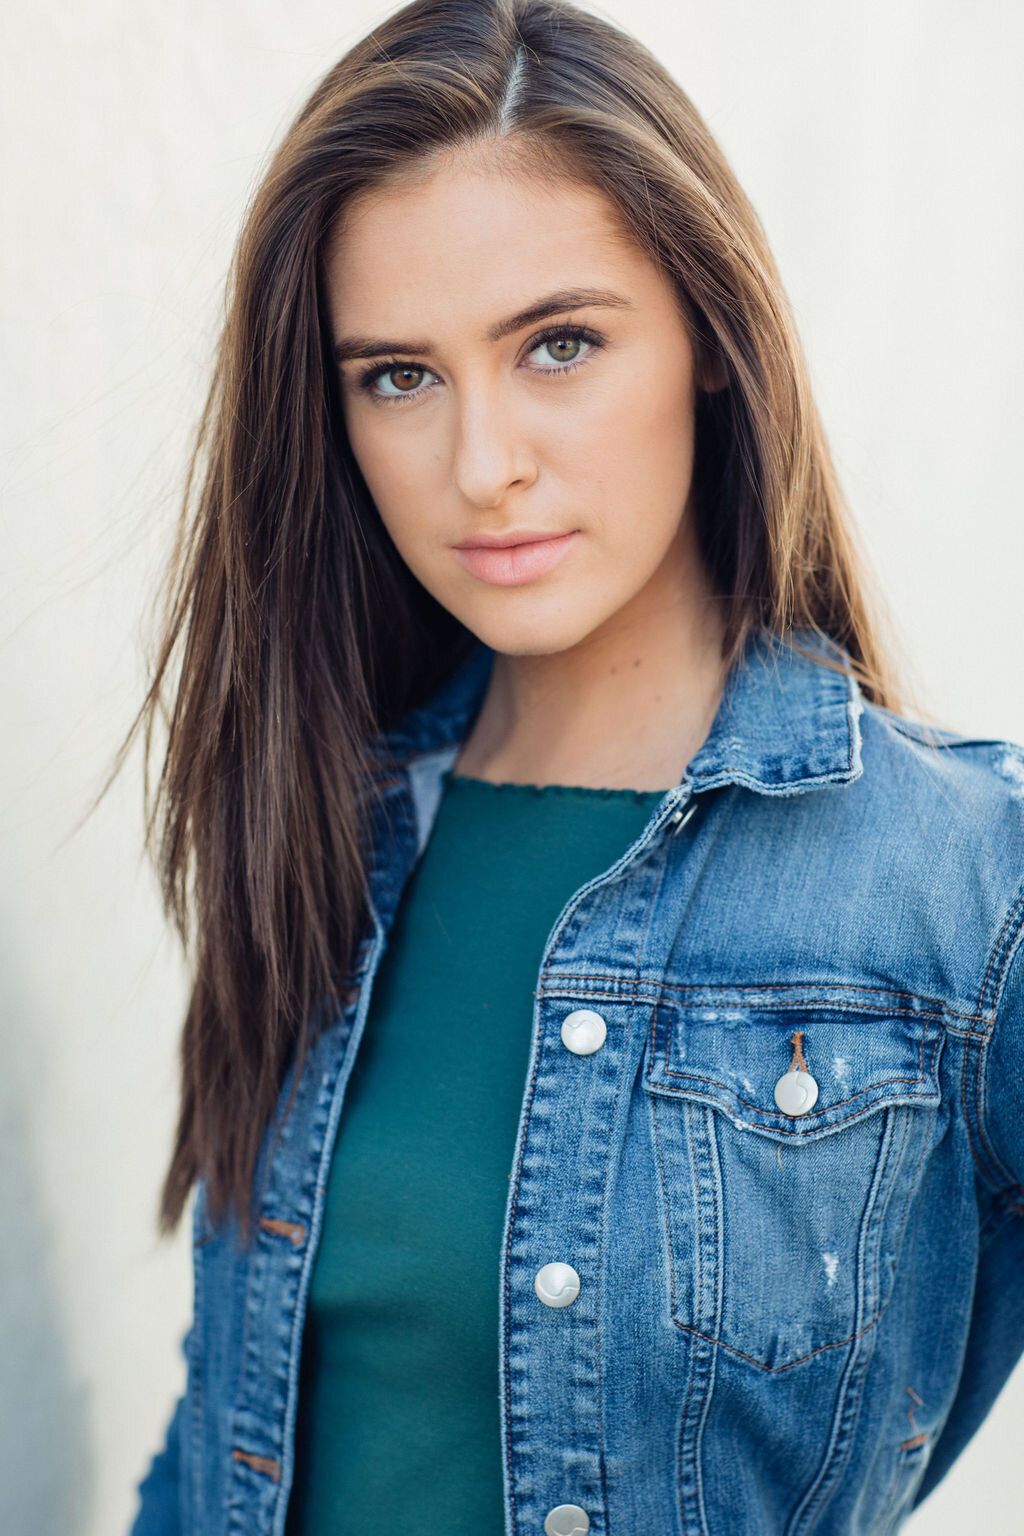 Headshot Photograph Of Young Woman In Outer Blue Denim Jacket And Inner Blue Shirt Los Angeles